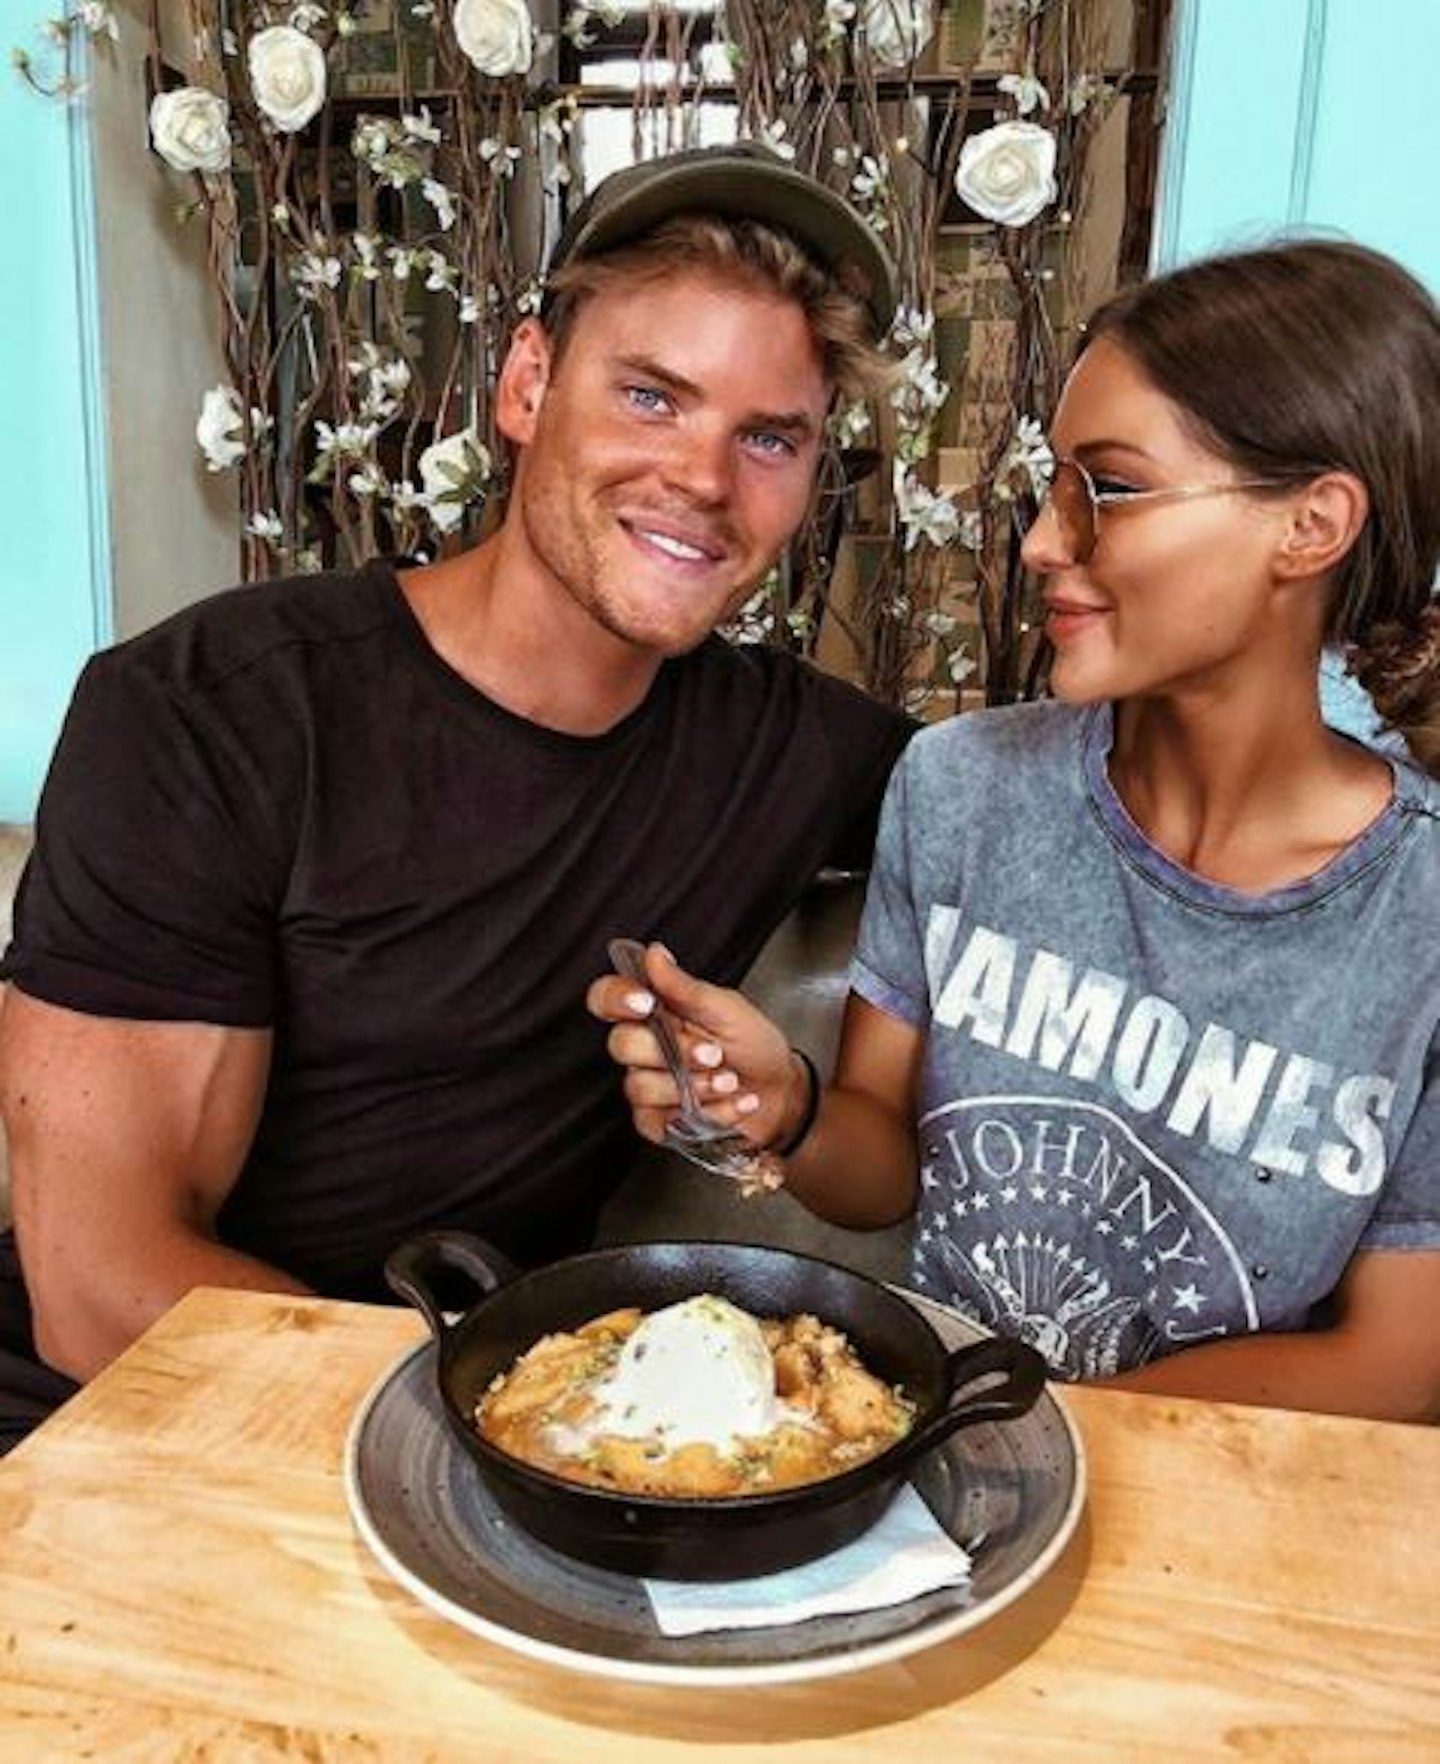 Ryan Libbey and Louise Thompson